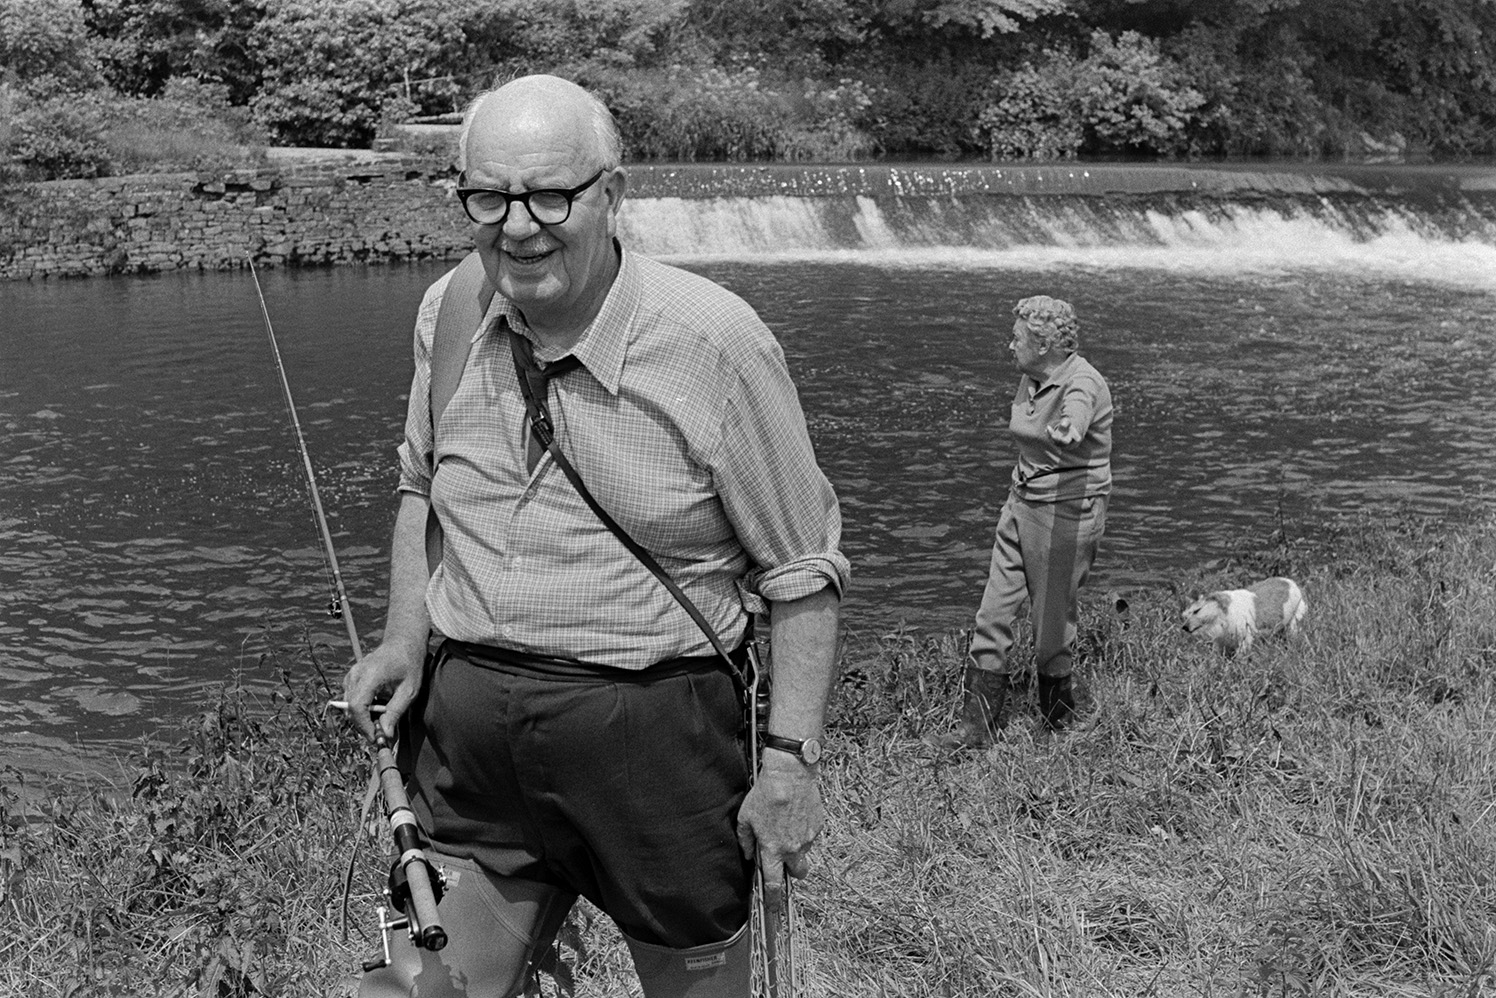 Dr J V Morris, OBE, by the River Torridge on a fishing holiday at the Half Moon Inn, Sheepwash. He is wearing waders and carrying a fishing rod. A woman and a dog are walking behind him along the riverbank and a weir can be seen in the background.